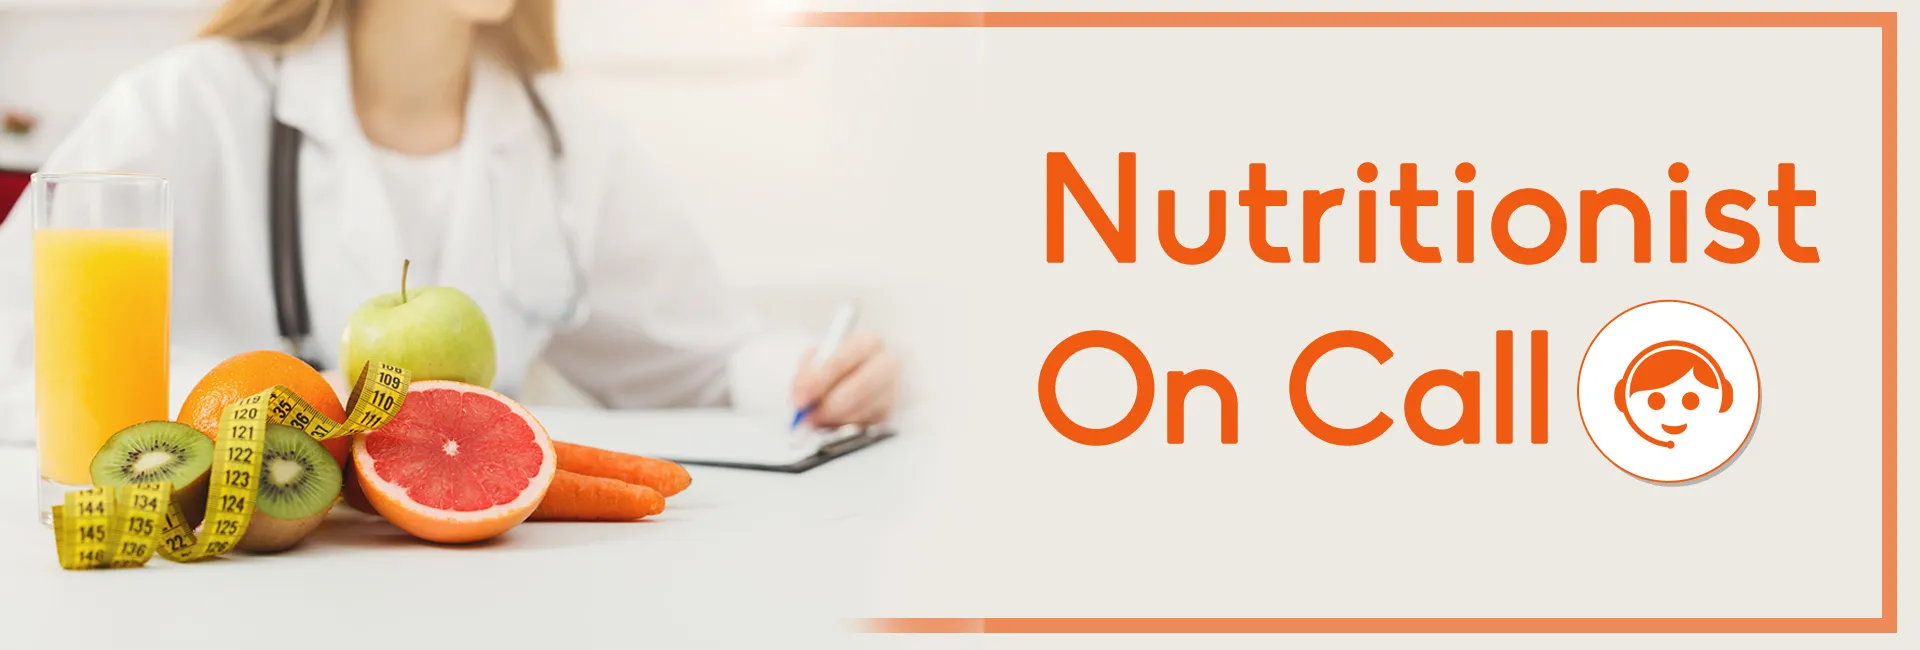 Nutritionist On Call In Senneterre